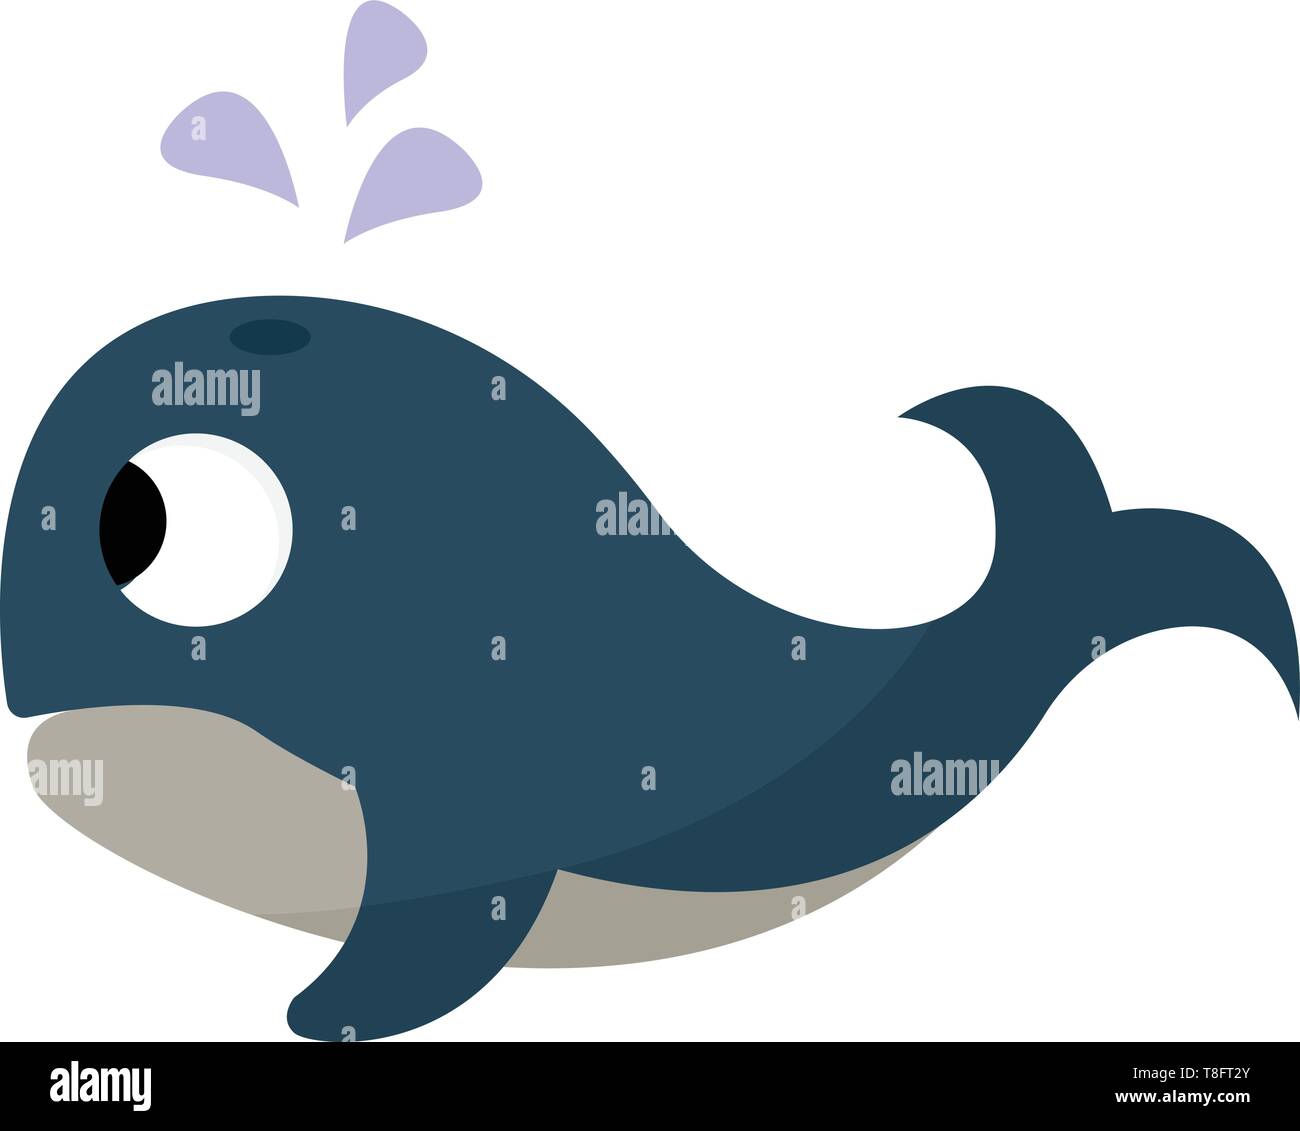 A whale in blue upperparts and grey underparts has a streamlined body, forked tail, triangular-like fins, crossed eyes and forms bubbles while swimmin Stock Vector